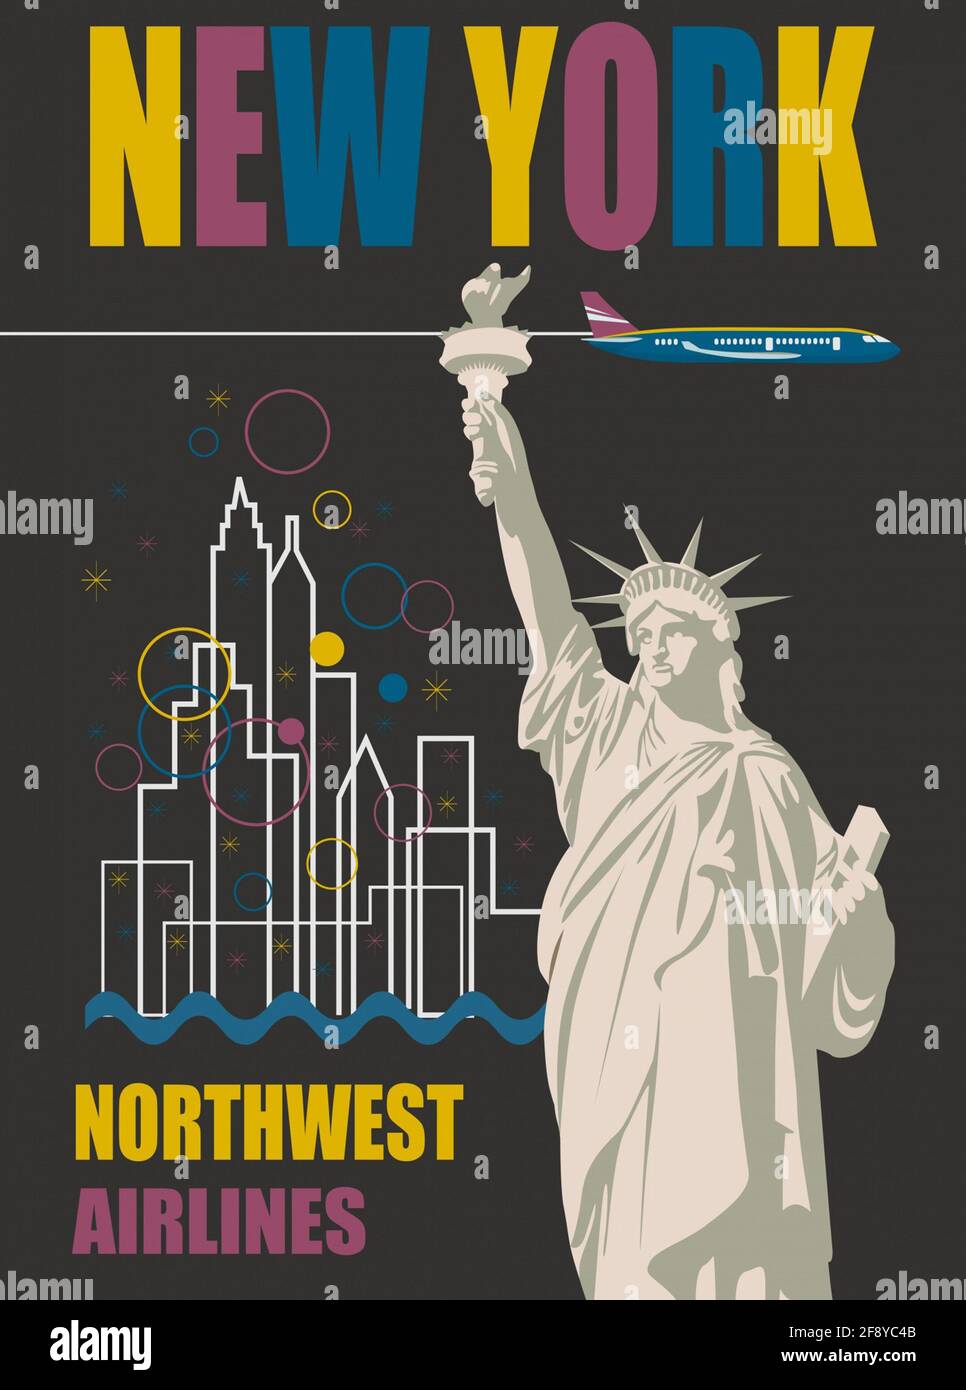 A vintage travel poster for New York by Northwest Airlines Stock Photo